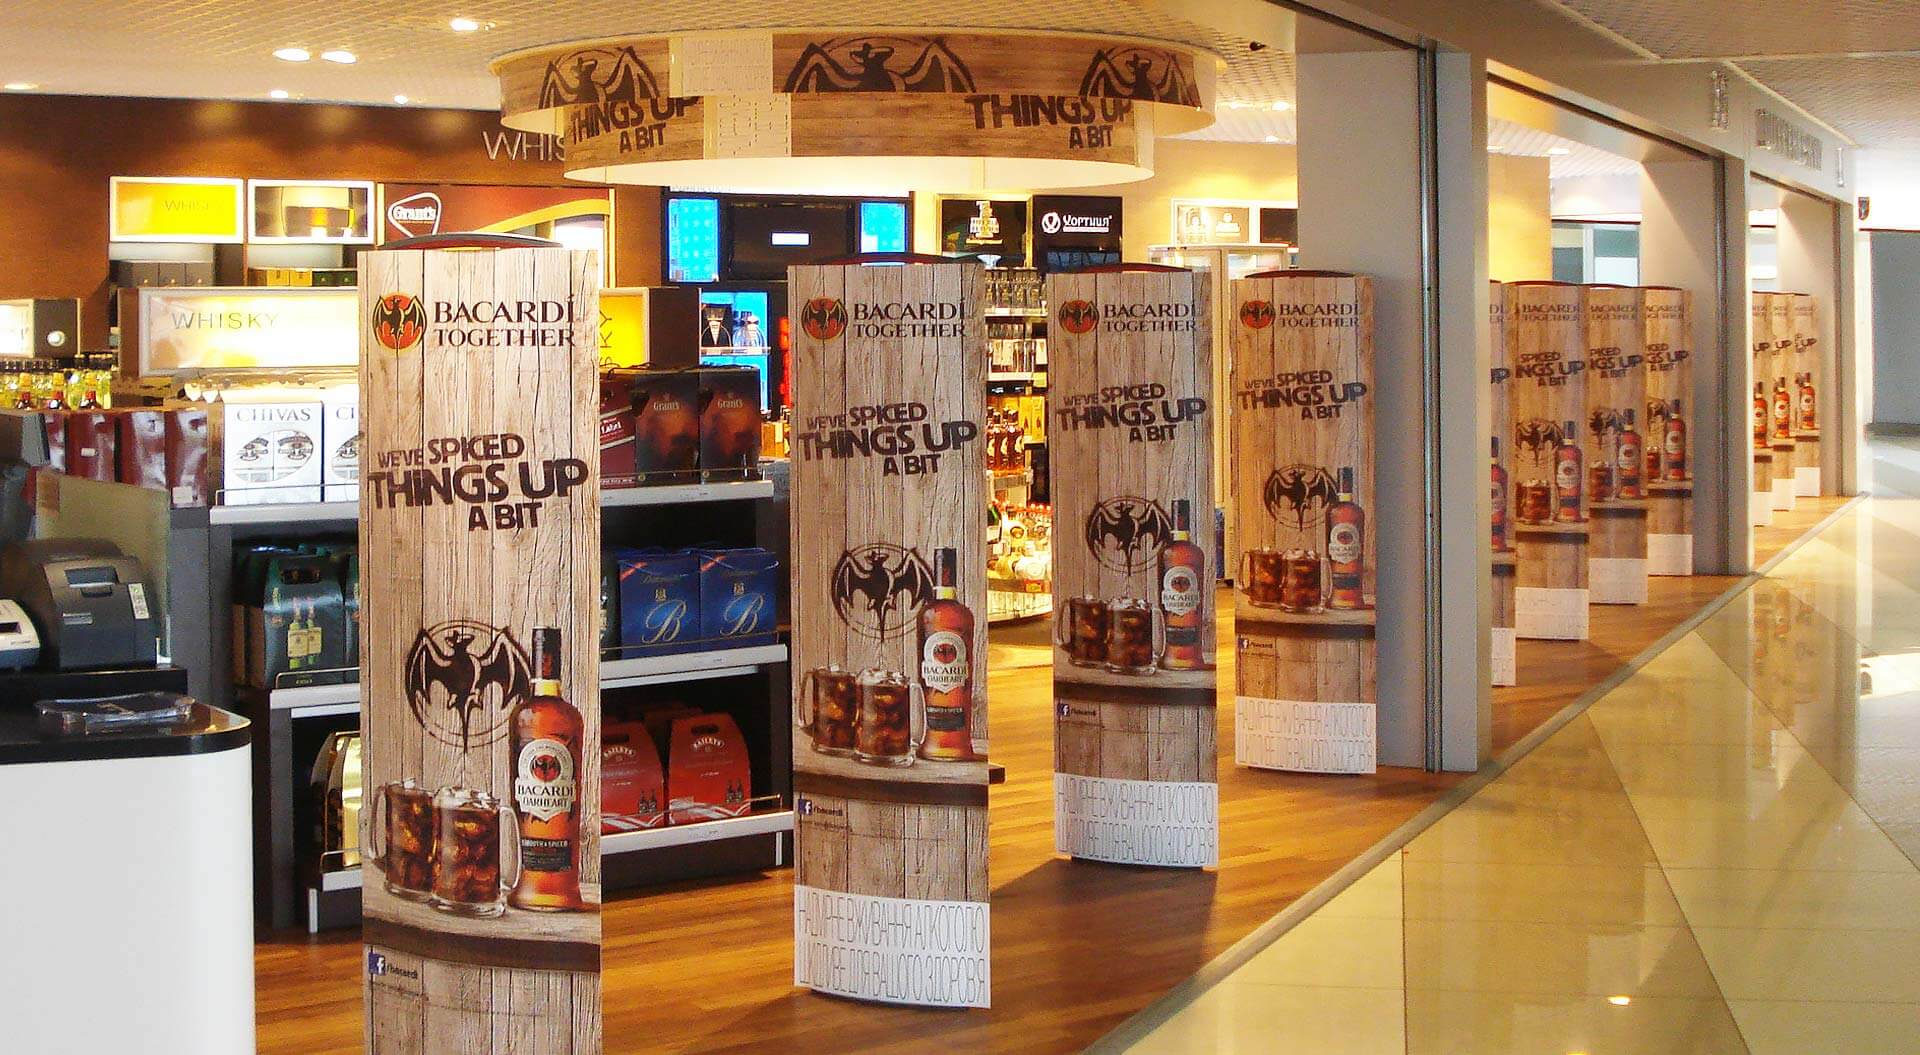 Bacardi Global Travel Retail, Oakheart brand experience, in airport duty free stores design, we've spiced things up a bit brand identity and platform